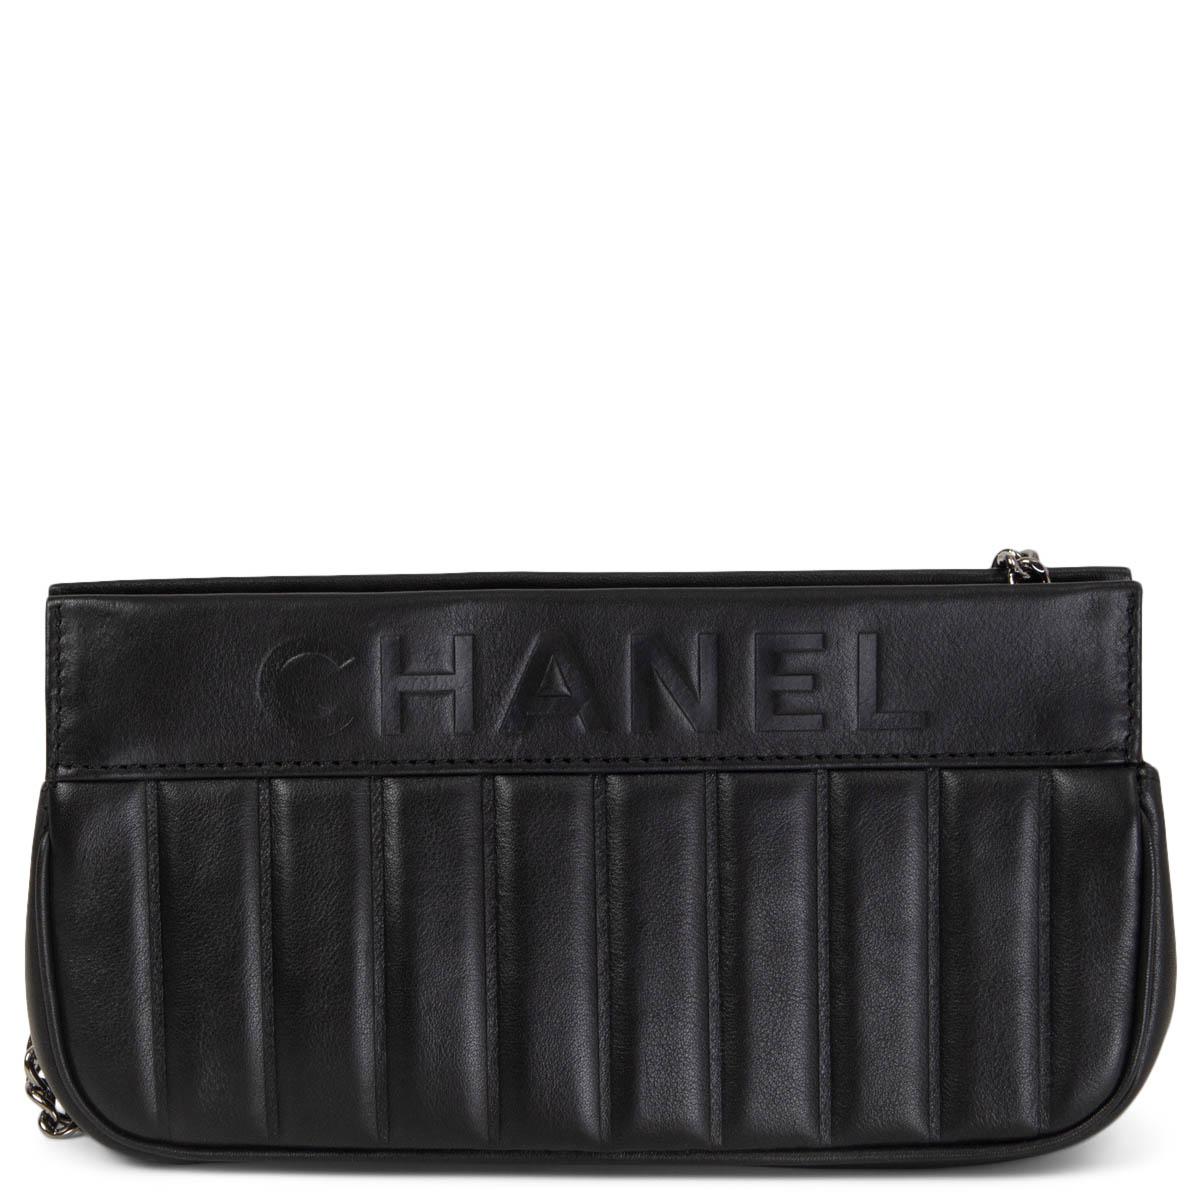 Black CHANEL black leather LAX SMALL VERTICAL QUILTE Clutch Shoulder Bag For Sale